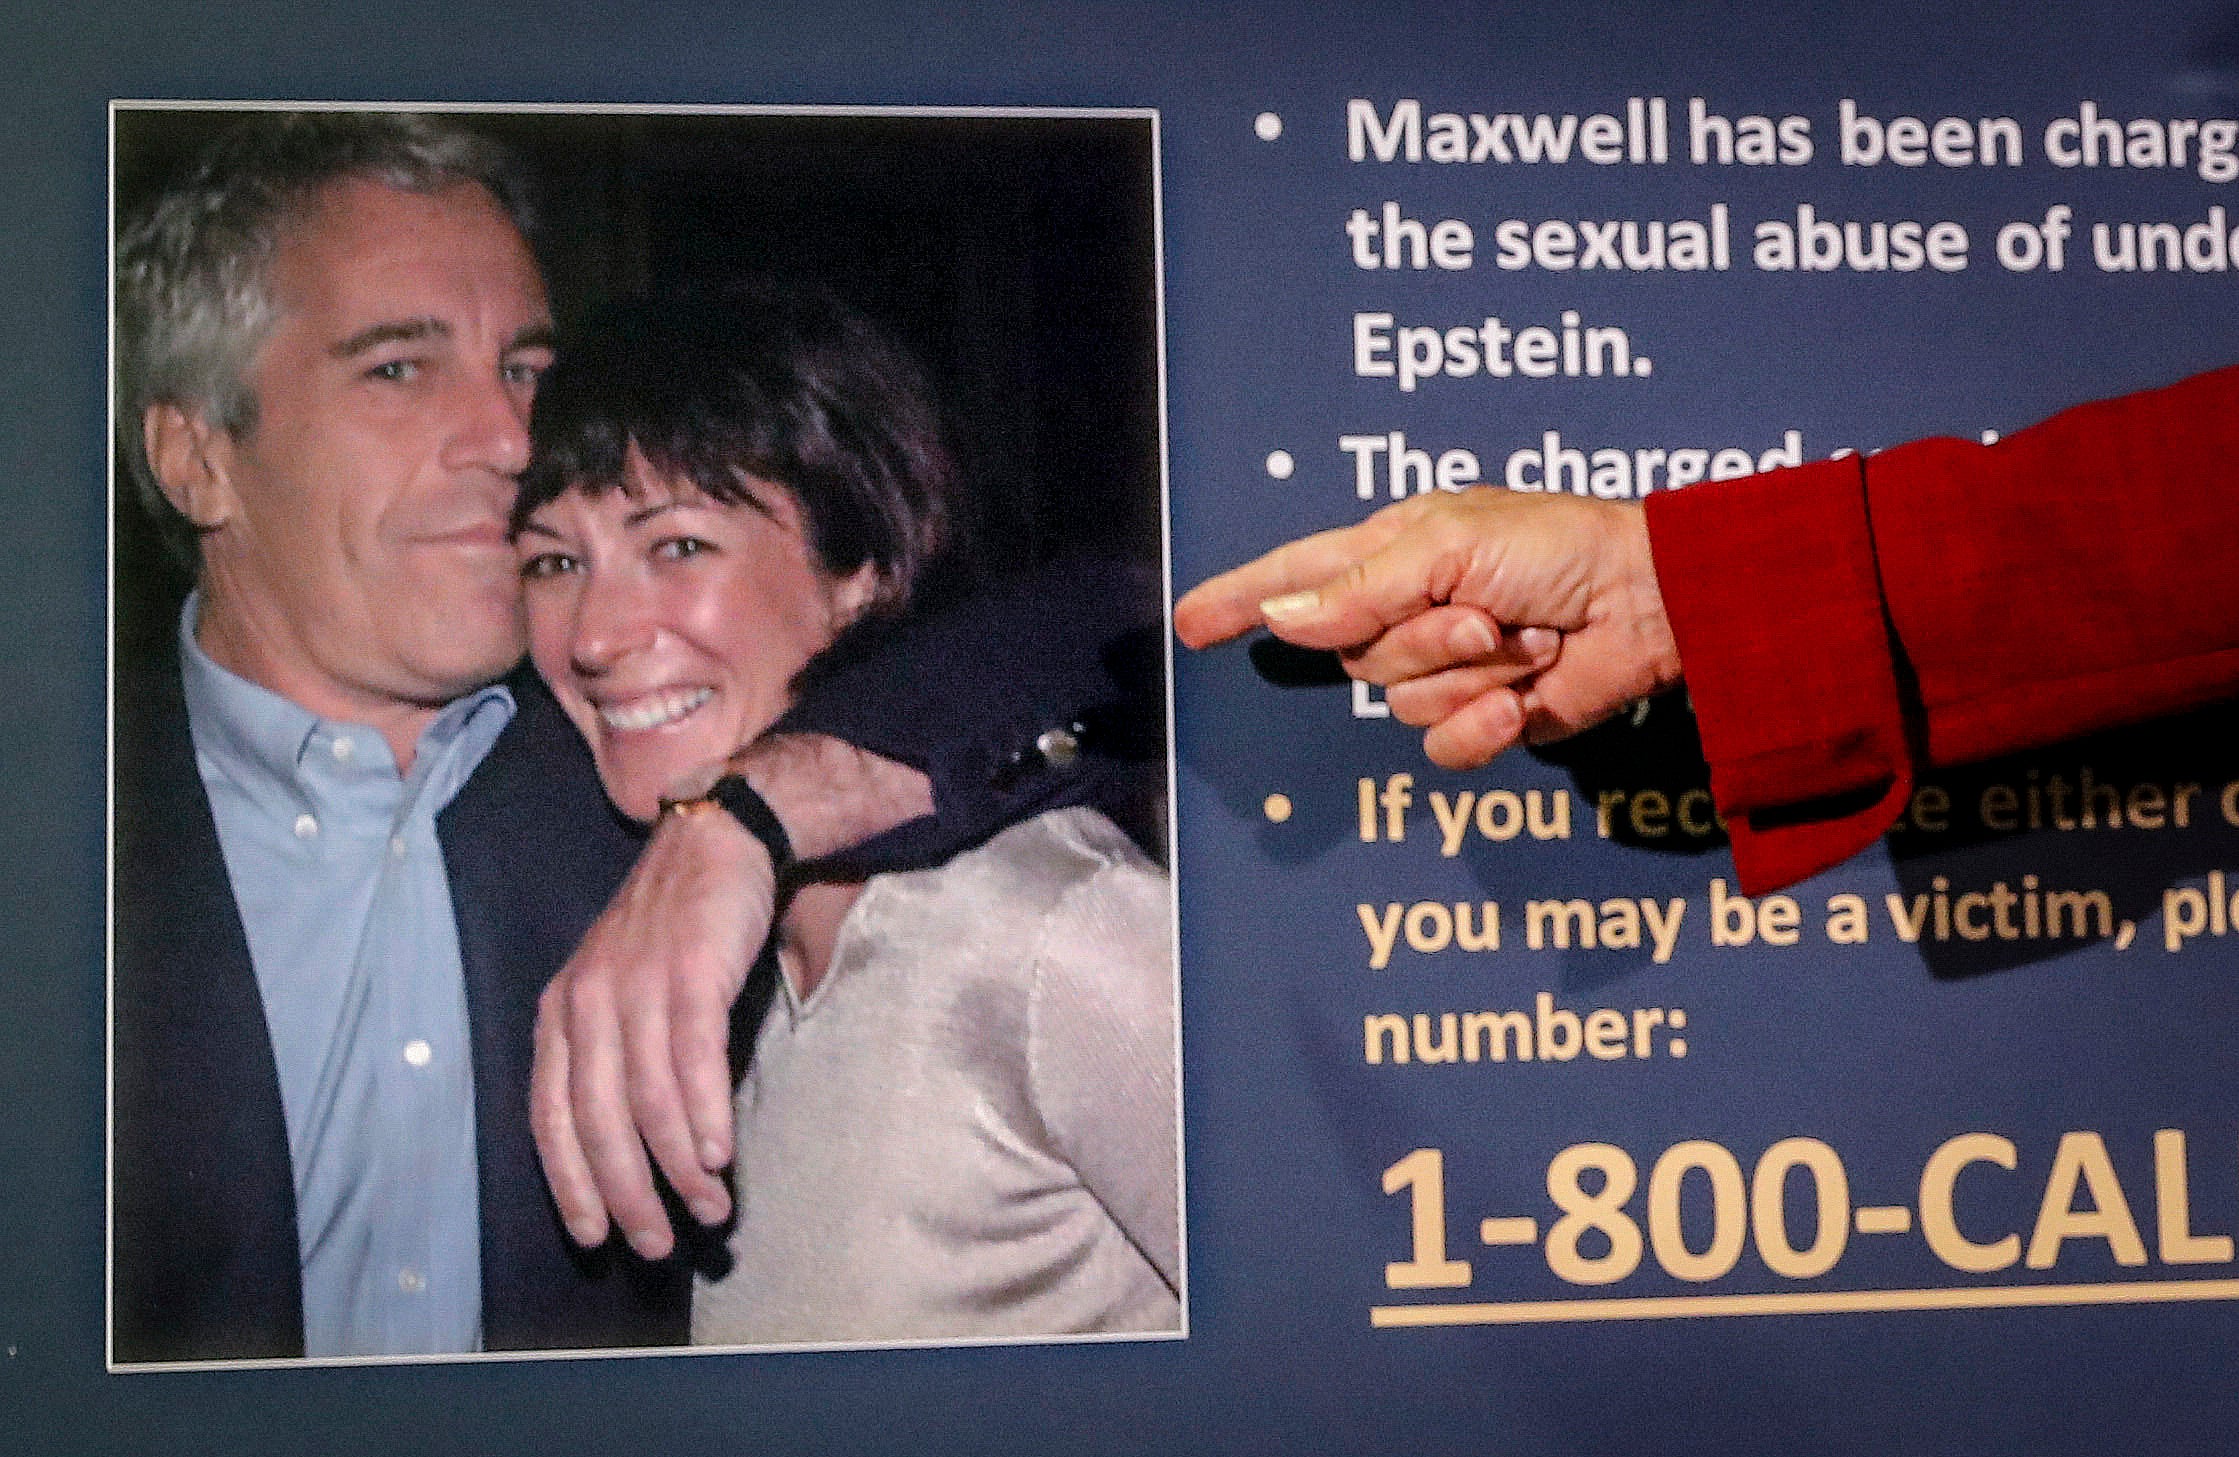 Jeffrey Epstein and British socialite Ghislaine Maxwell have been accused of sexual abuse and exploitation in the UK.